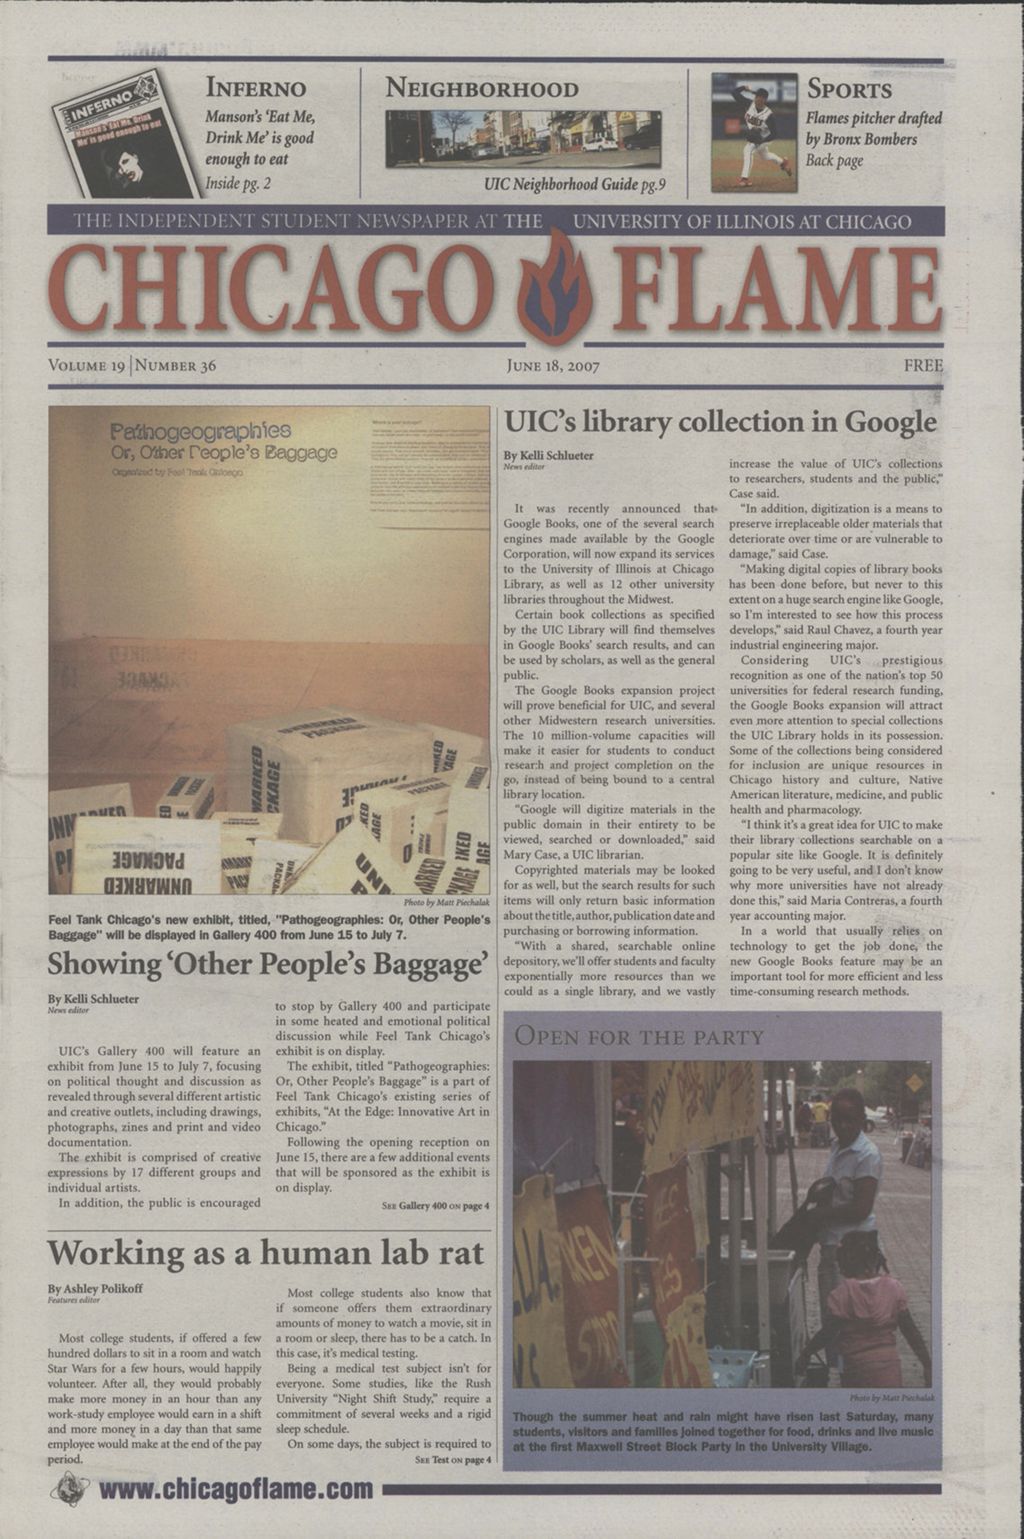 Chicago Flame (June 18, 2007)